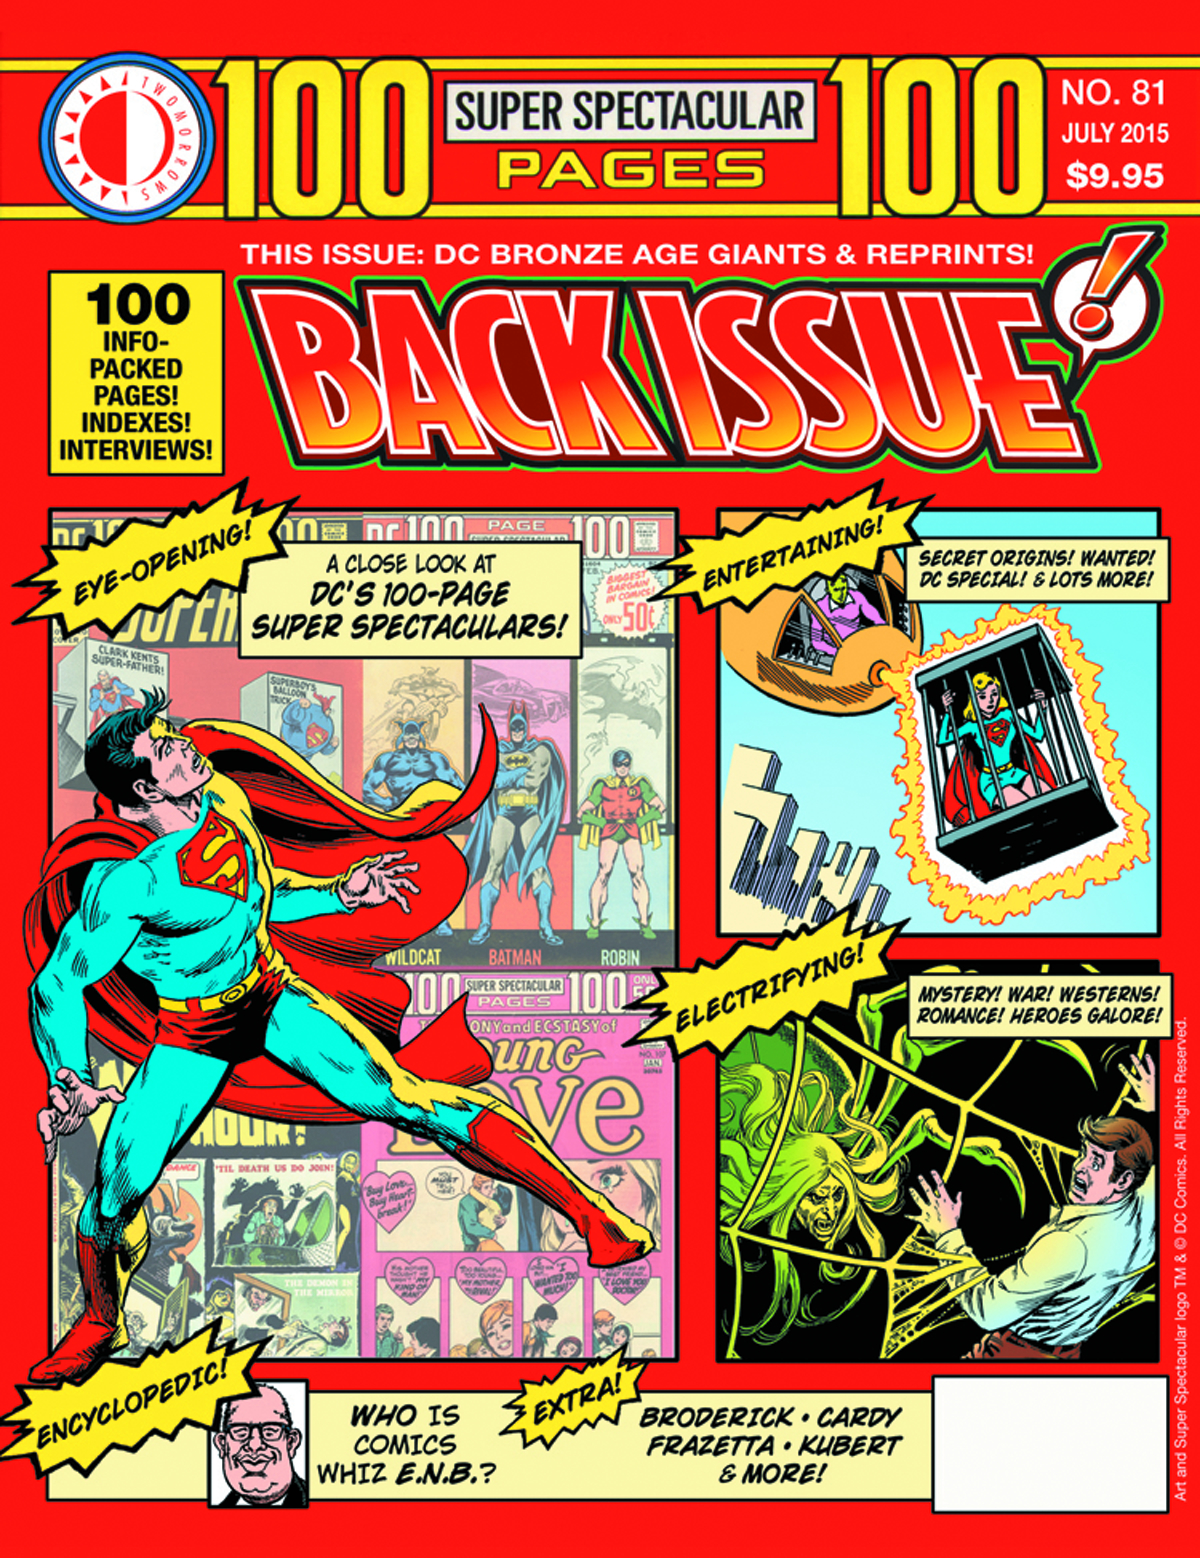 BACK ISSUE #81